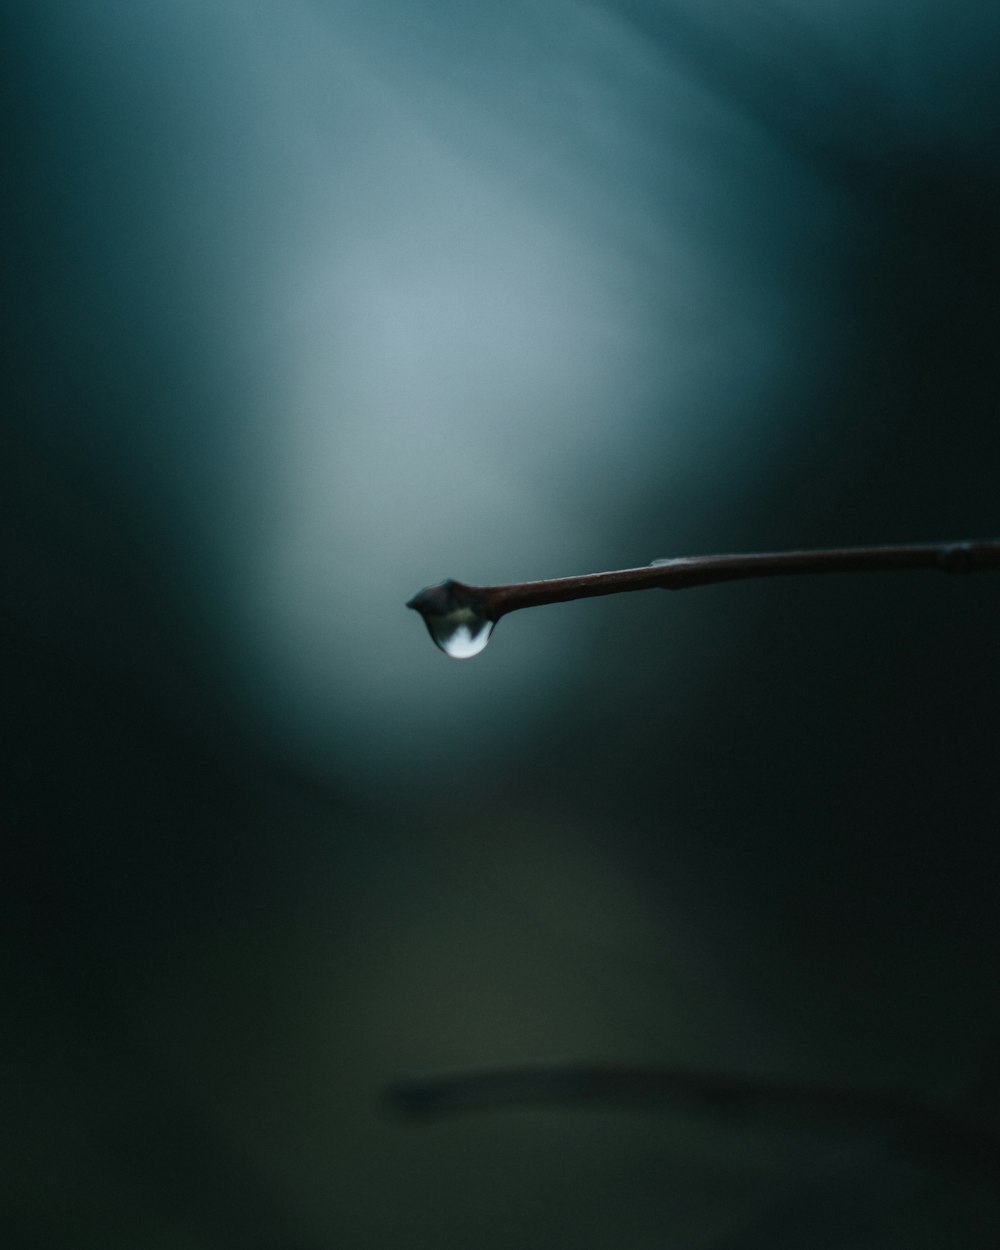 a drop of water is hanging from a twig